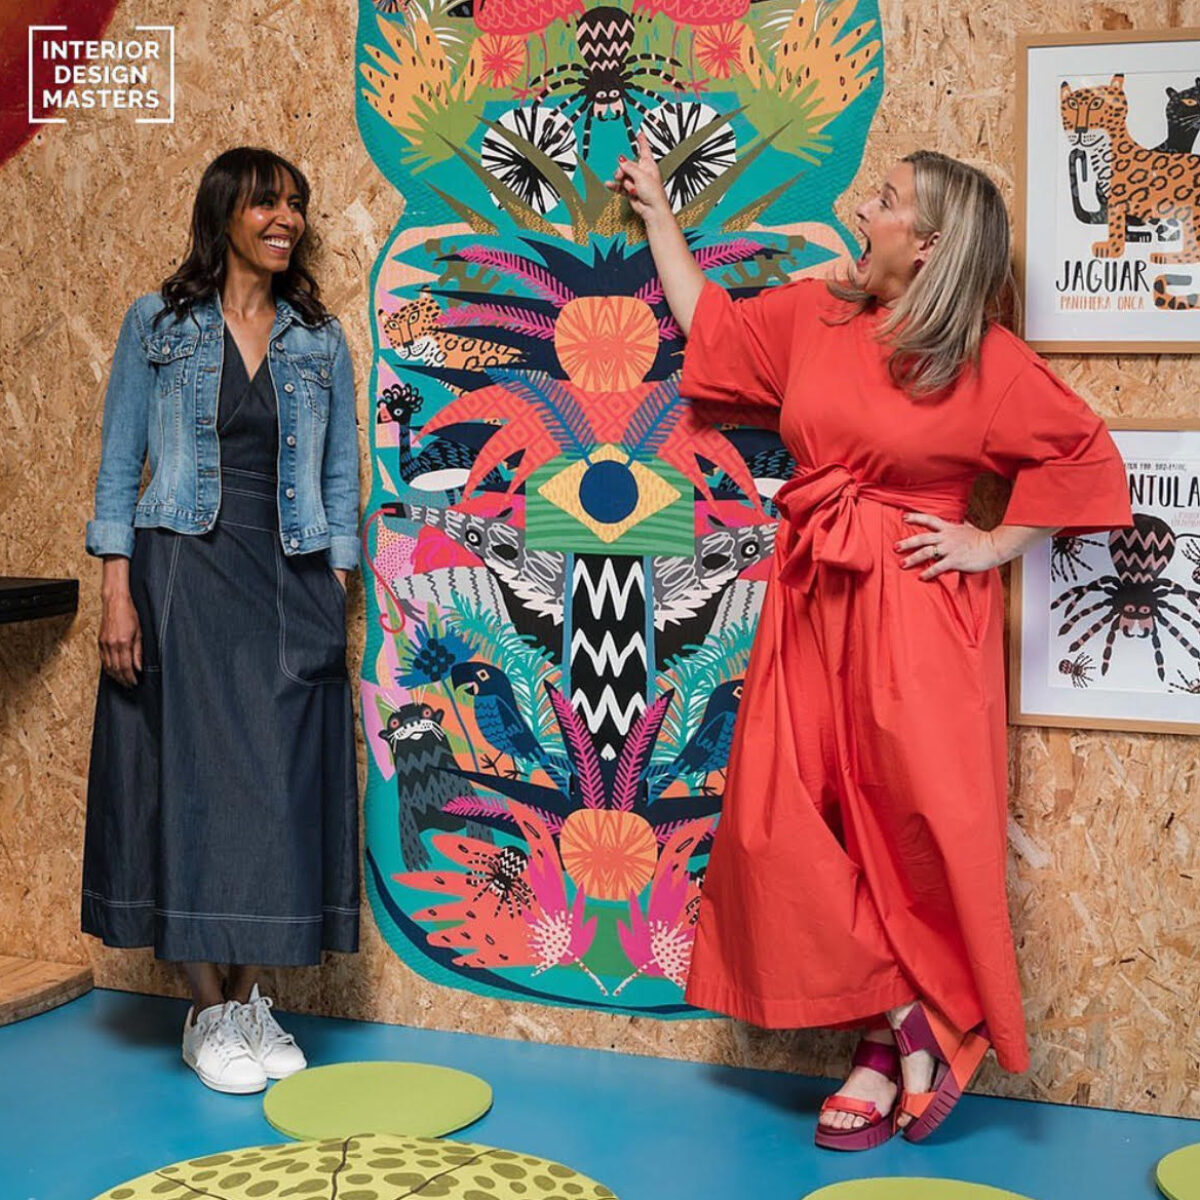 Michelle wearing navy dress and denim jacket stands next to Sophie in orange dress and heels in front of a brightly coloured display on cork walls.